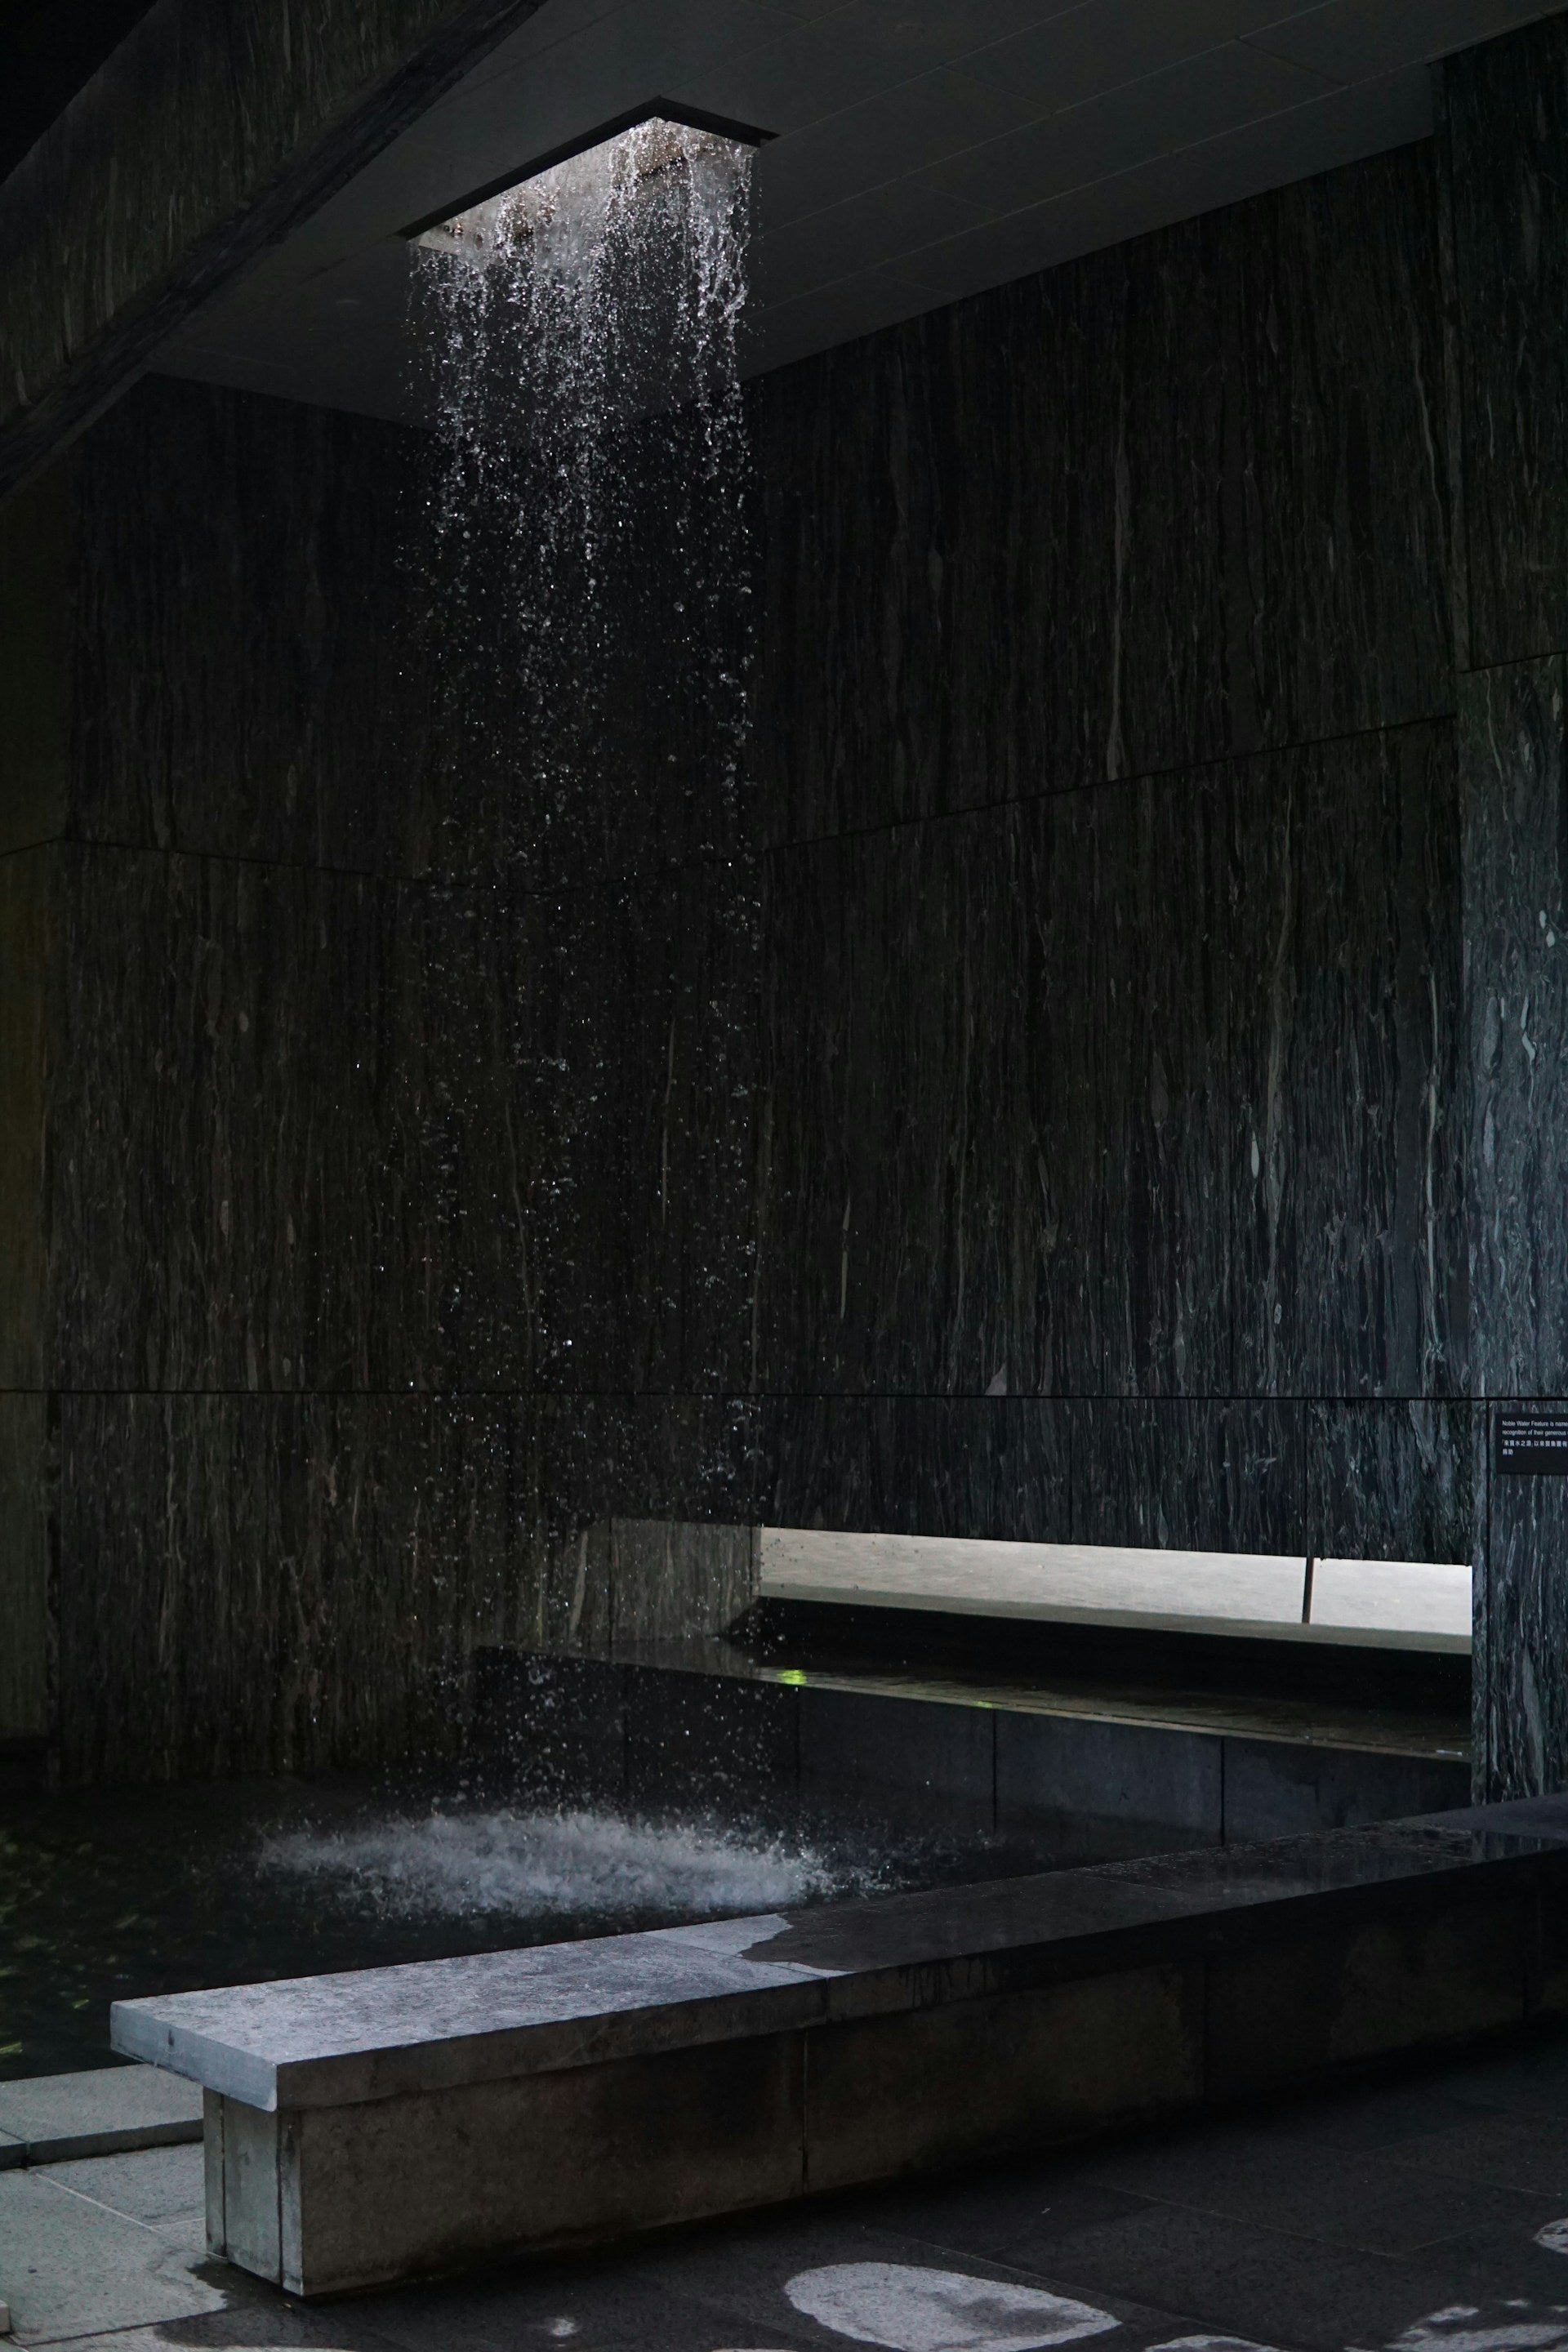 A dark bathroom with a waterfall in the middle of it.